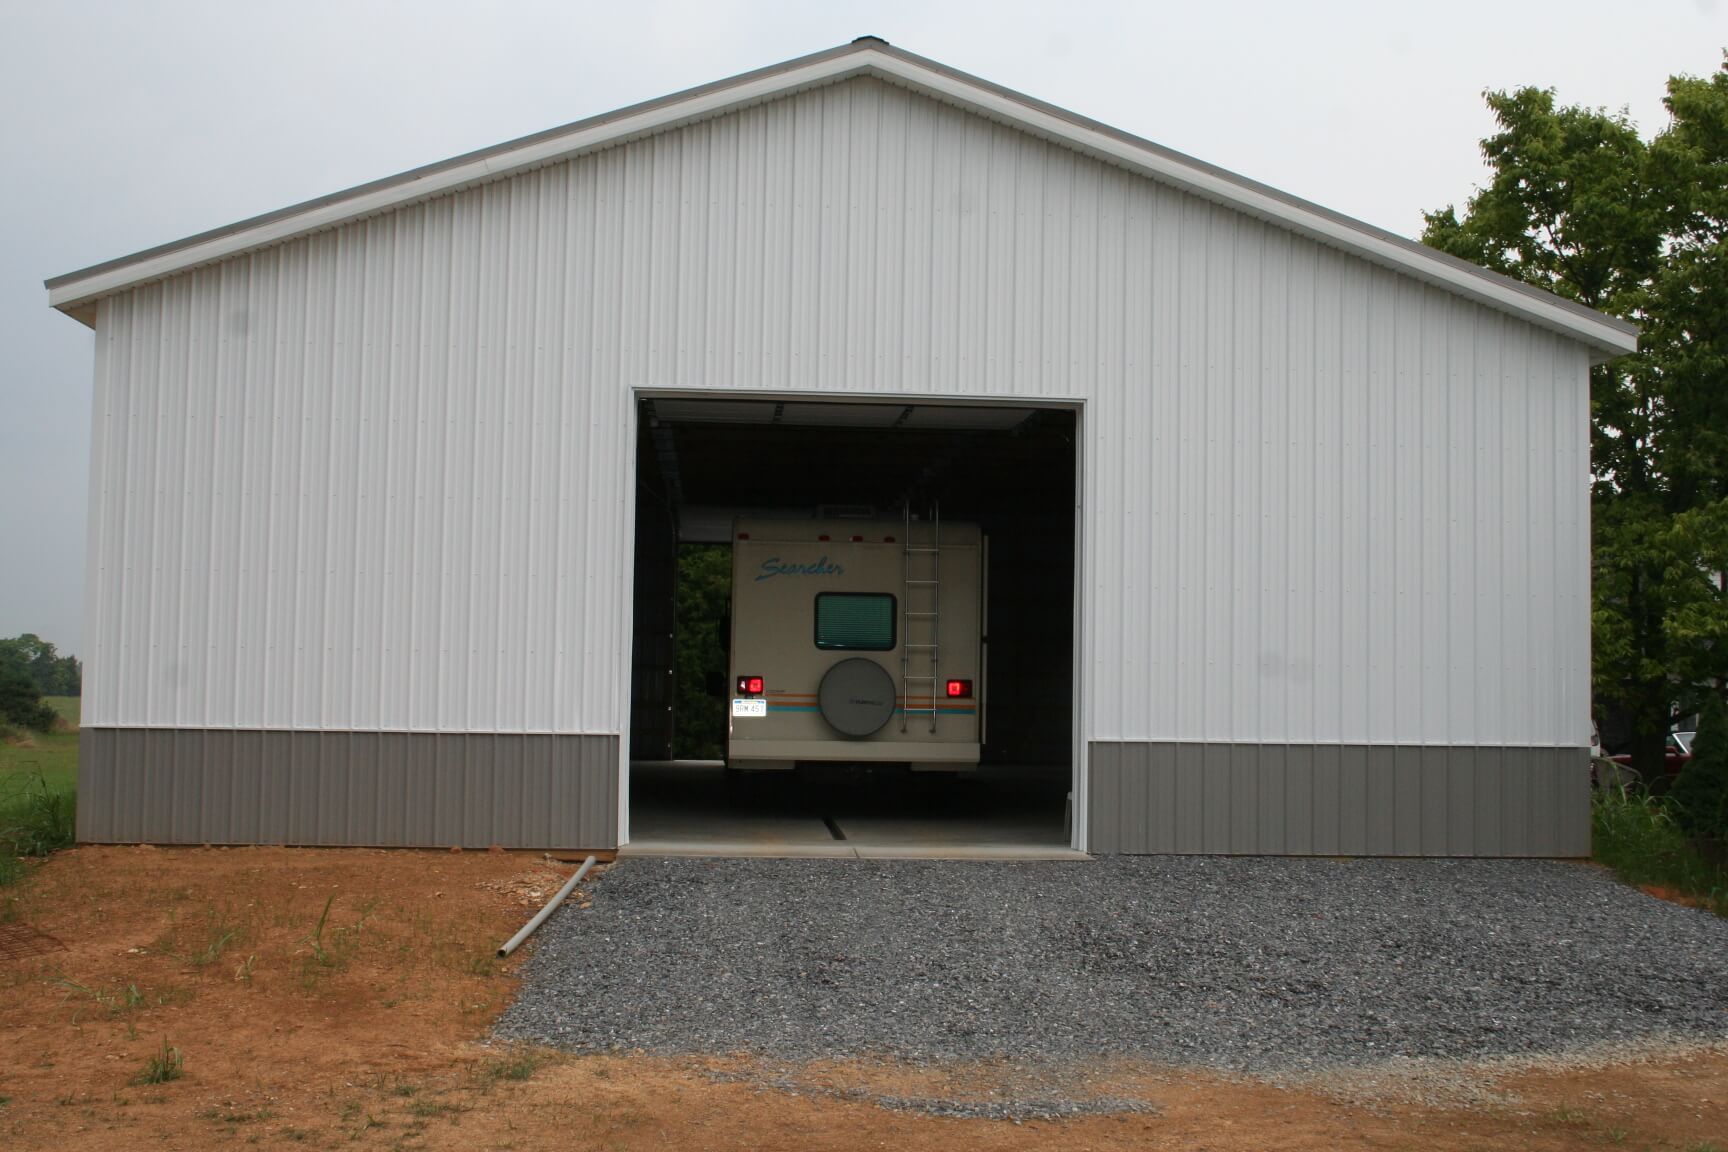 May Project Profile: AGRICULTURAL STORAGE POLE BUILDING